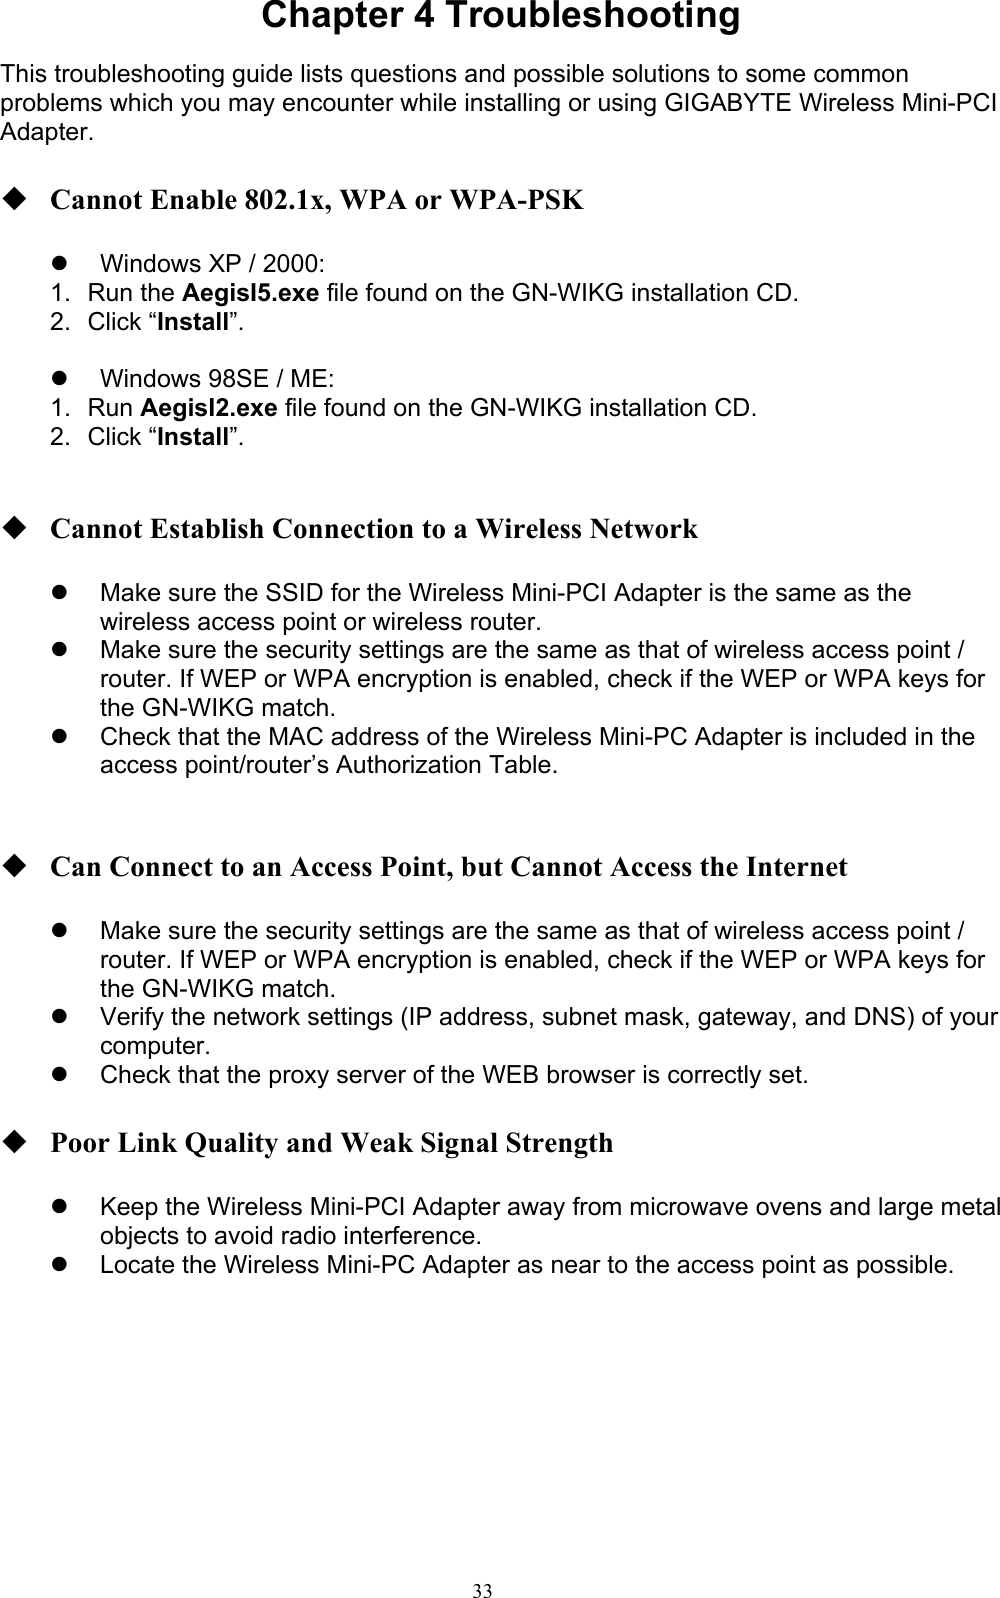 33  Chapter 4 Troubleshooting  This troubleshooting guide lists questions and possible solutions to some common problems which you may encounter while installing or using GIGABYTE Wireless Mini-PCI Adapter.   Cannot Enable 802.1x, WPA or WPA-PSK    Windows XP / 2000: 1. Run the AegisI5.exe file found on the GN-WIKG installation CD. 2. Click “Install”.    Windows 98SE / ME: 1. Run AegisI2.exe file found on the GN-WIKG installation CD. 2. Click “Install”.    Cannot Establish Connection to a Wireless Network    Make sure the SSID for the Wireless Mini-PCI Adapter is the same as the wireless access point or wireless router.   Make sure the security settings are the same as that of wireless access point / router. If WEP or WPA encryption is enabled, check if the WEP or WPA keys for the GN-WIKG match.     Check that the MAC address of the Wireless Mini-PC Adapter is included in the access point/router’s Authorization Table.      Can Connect to an Access Point, but Cannot Access the Internet    Make sure the security settings are the same as that of wireless access point / router. If WEP or WPA encryption is enabled, check if the WEP or WPA keys for the GN-WIKG match.     Verify the network settings (IP address, subnet mask, gateway, and DNS) of your computer.   Check that the proxy server of the WEB browser is correctly set.   Poor Link Quality and Weak Signal Strength    Keep the Wireless Mini-PCI Adapter away from microwave ovens and large metal objects to avoid radio interference.   Locate the Wireless Mini-PC Adapter as near to the access point as possible.   